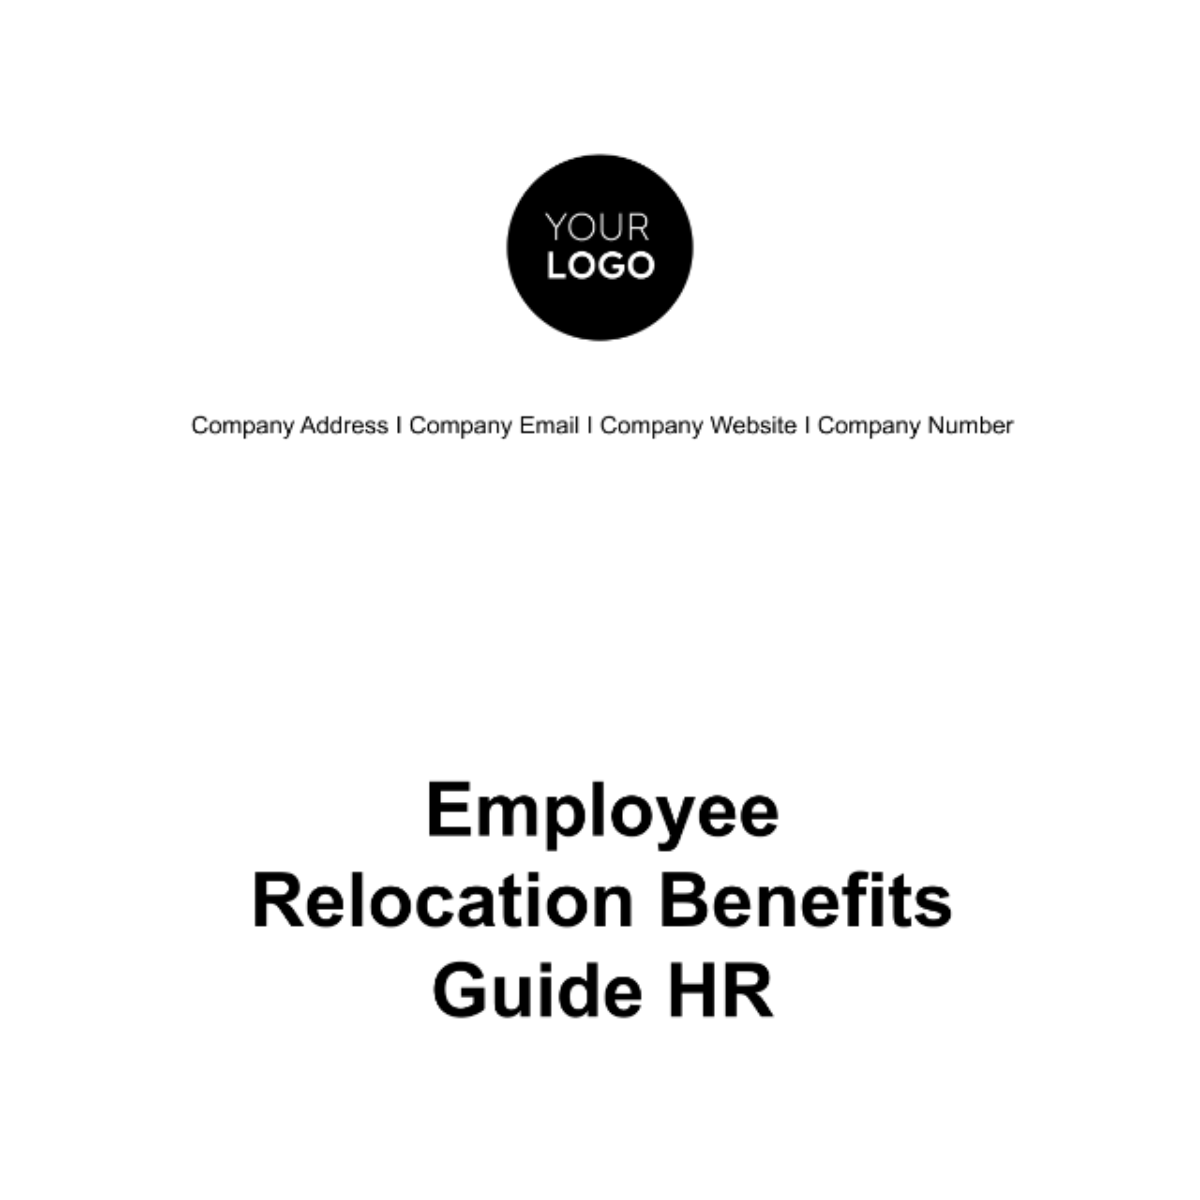 Employee Relocation Benefits Guide HR Template